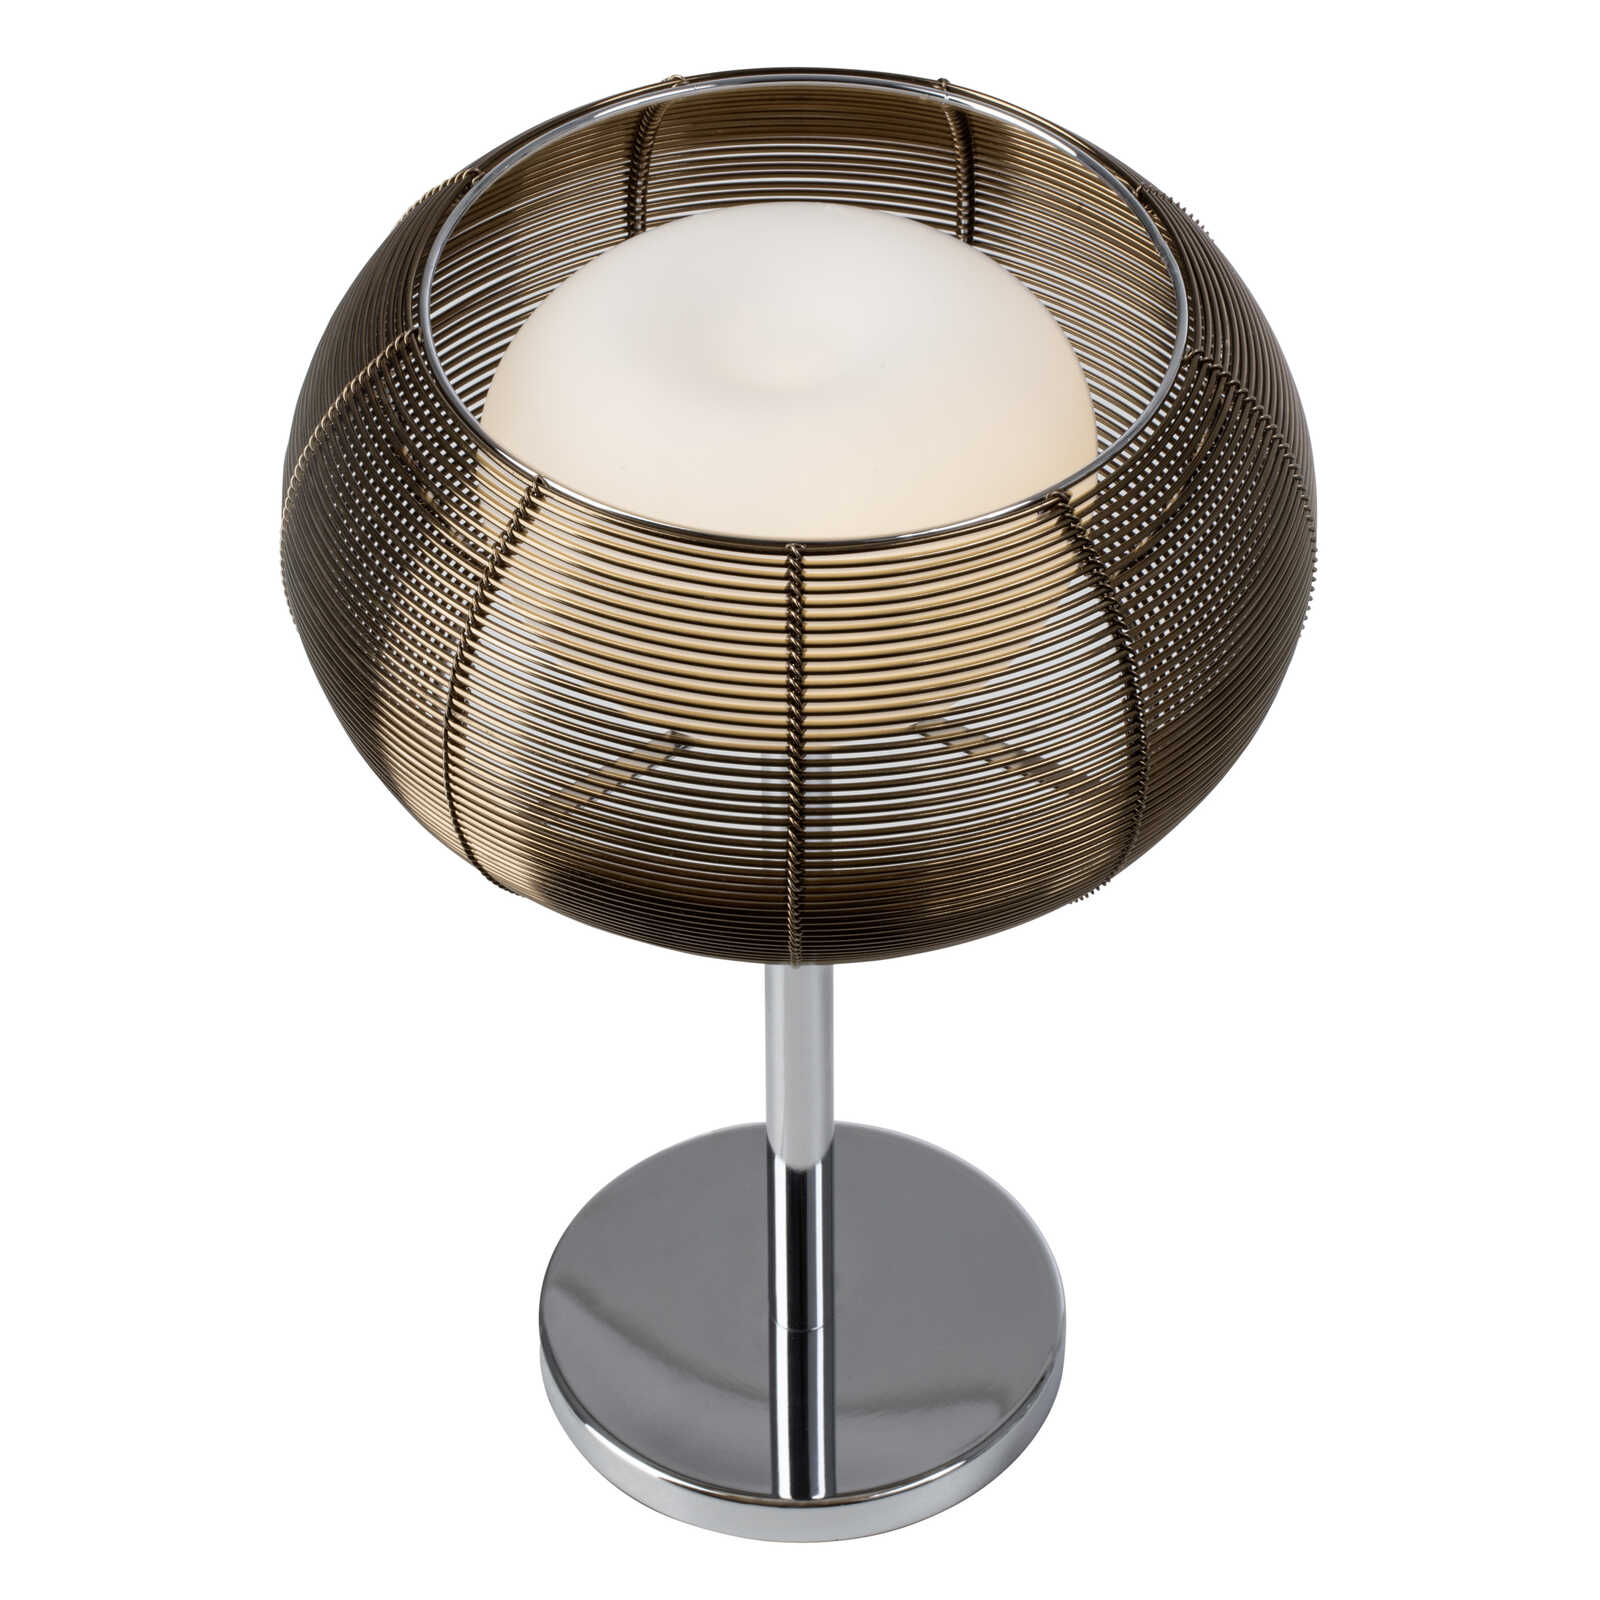             Glass table lamp - Maxime 4 - Brown
        